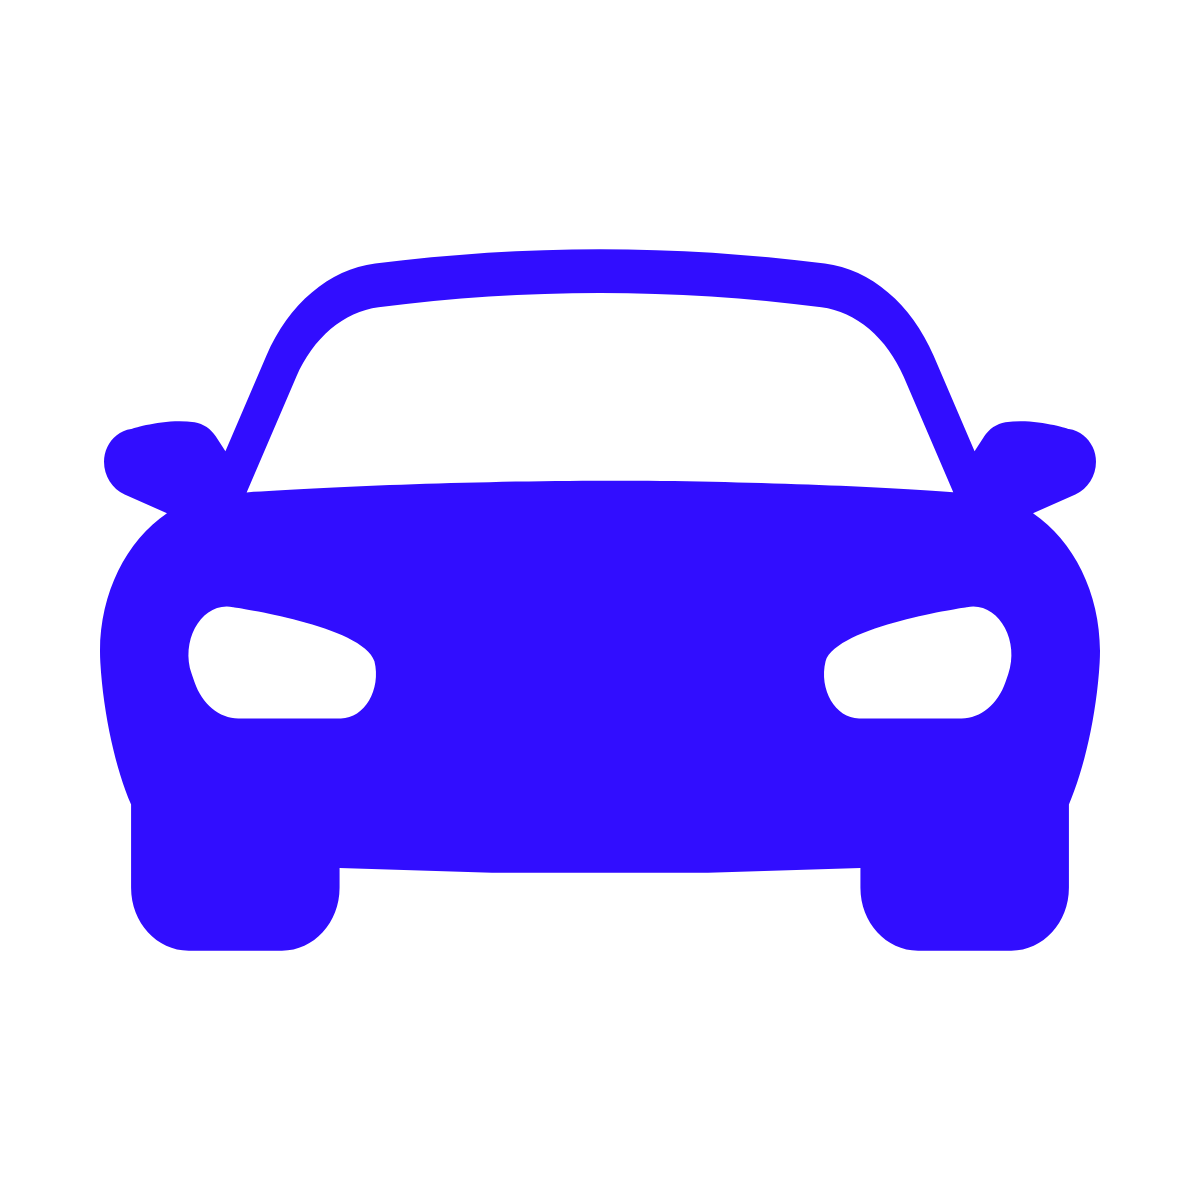 Image of a car, signifying the motoring industry